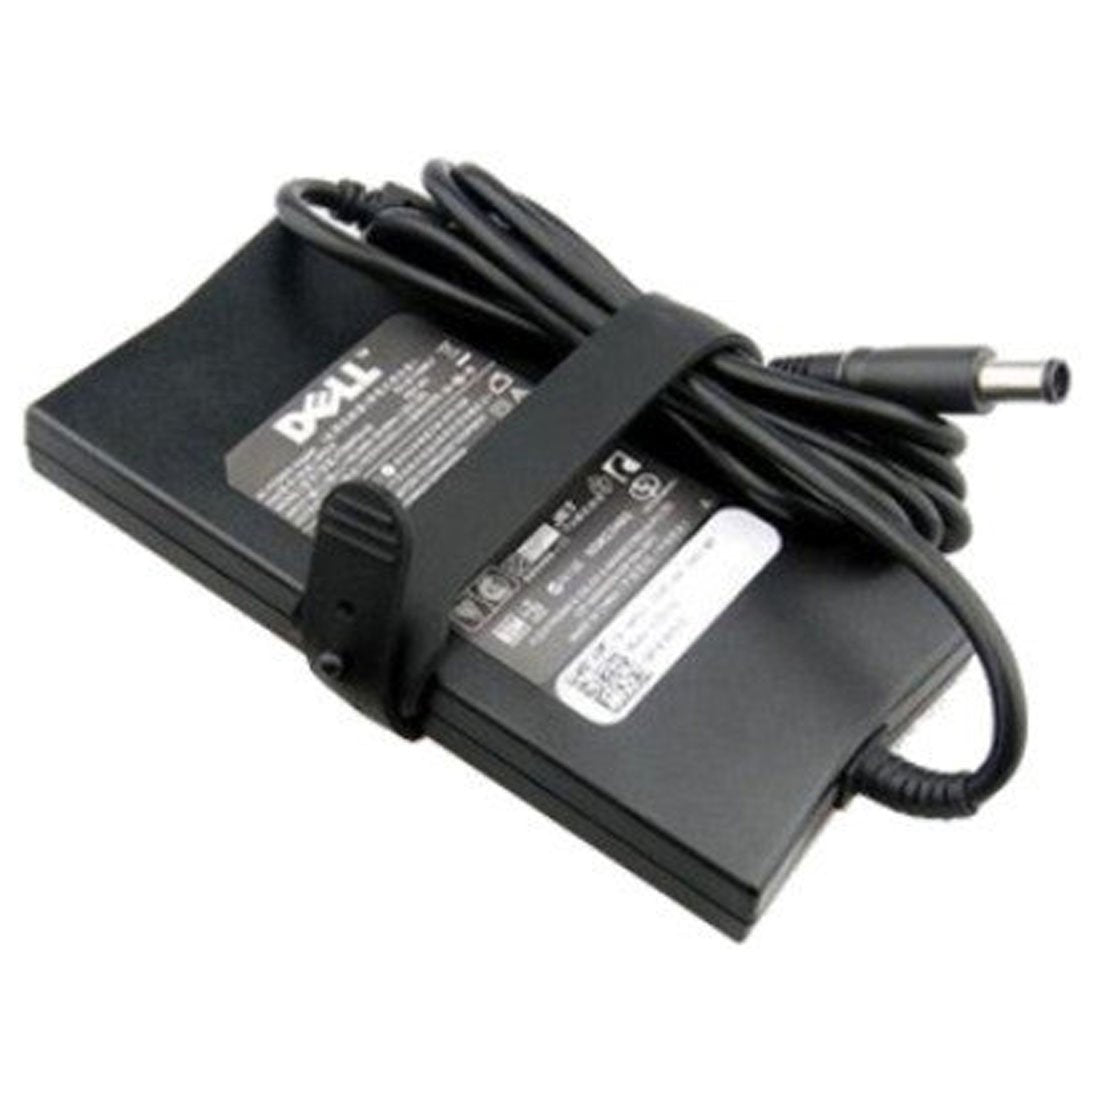 Dell Original 130W 19.5V 7.4mm Pin Laptop Charger Adapter for Studio 15 1537 With Power Cord